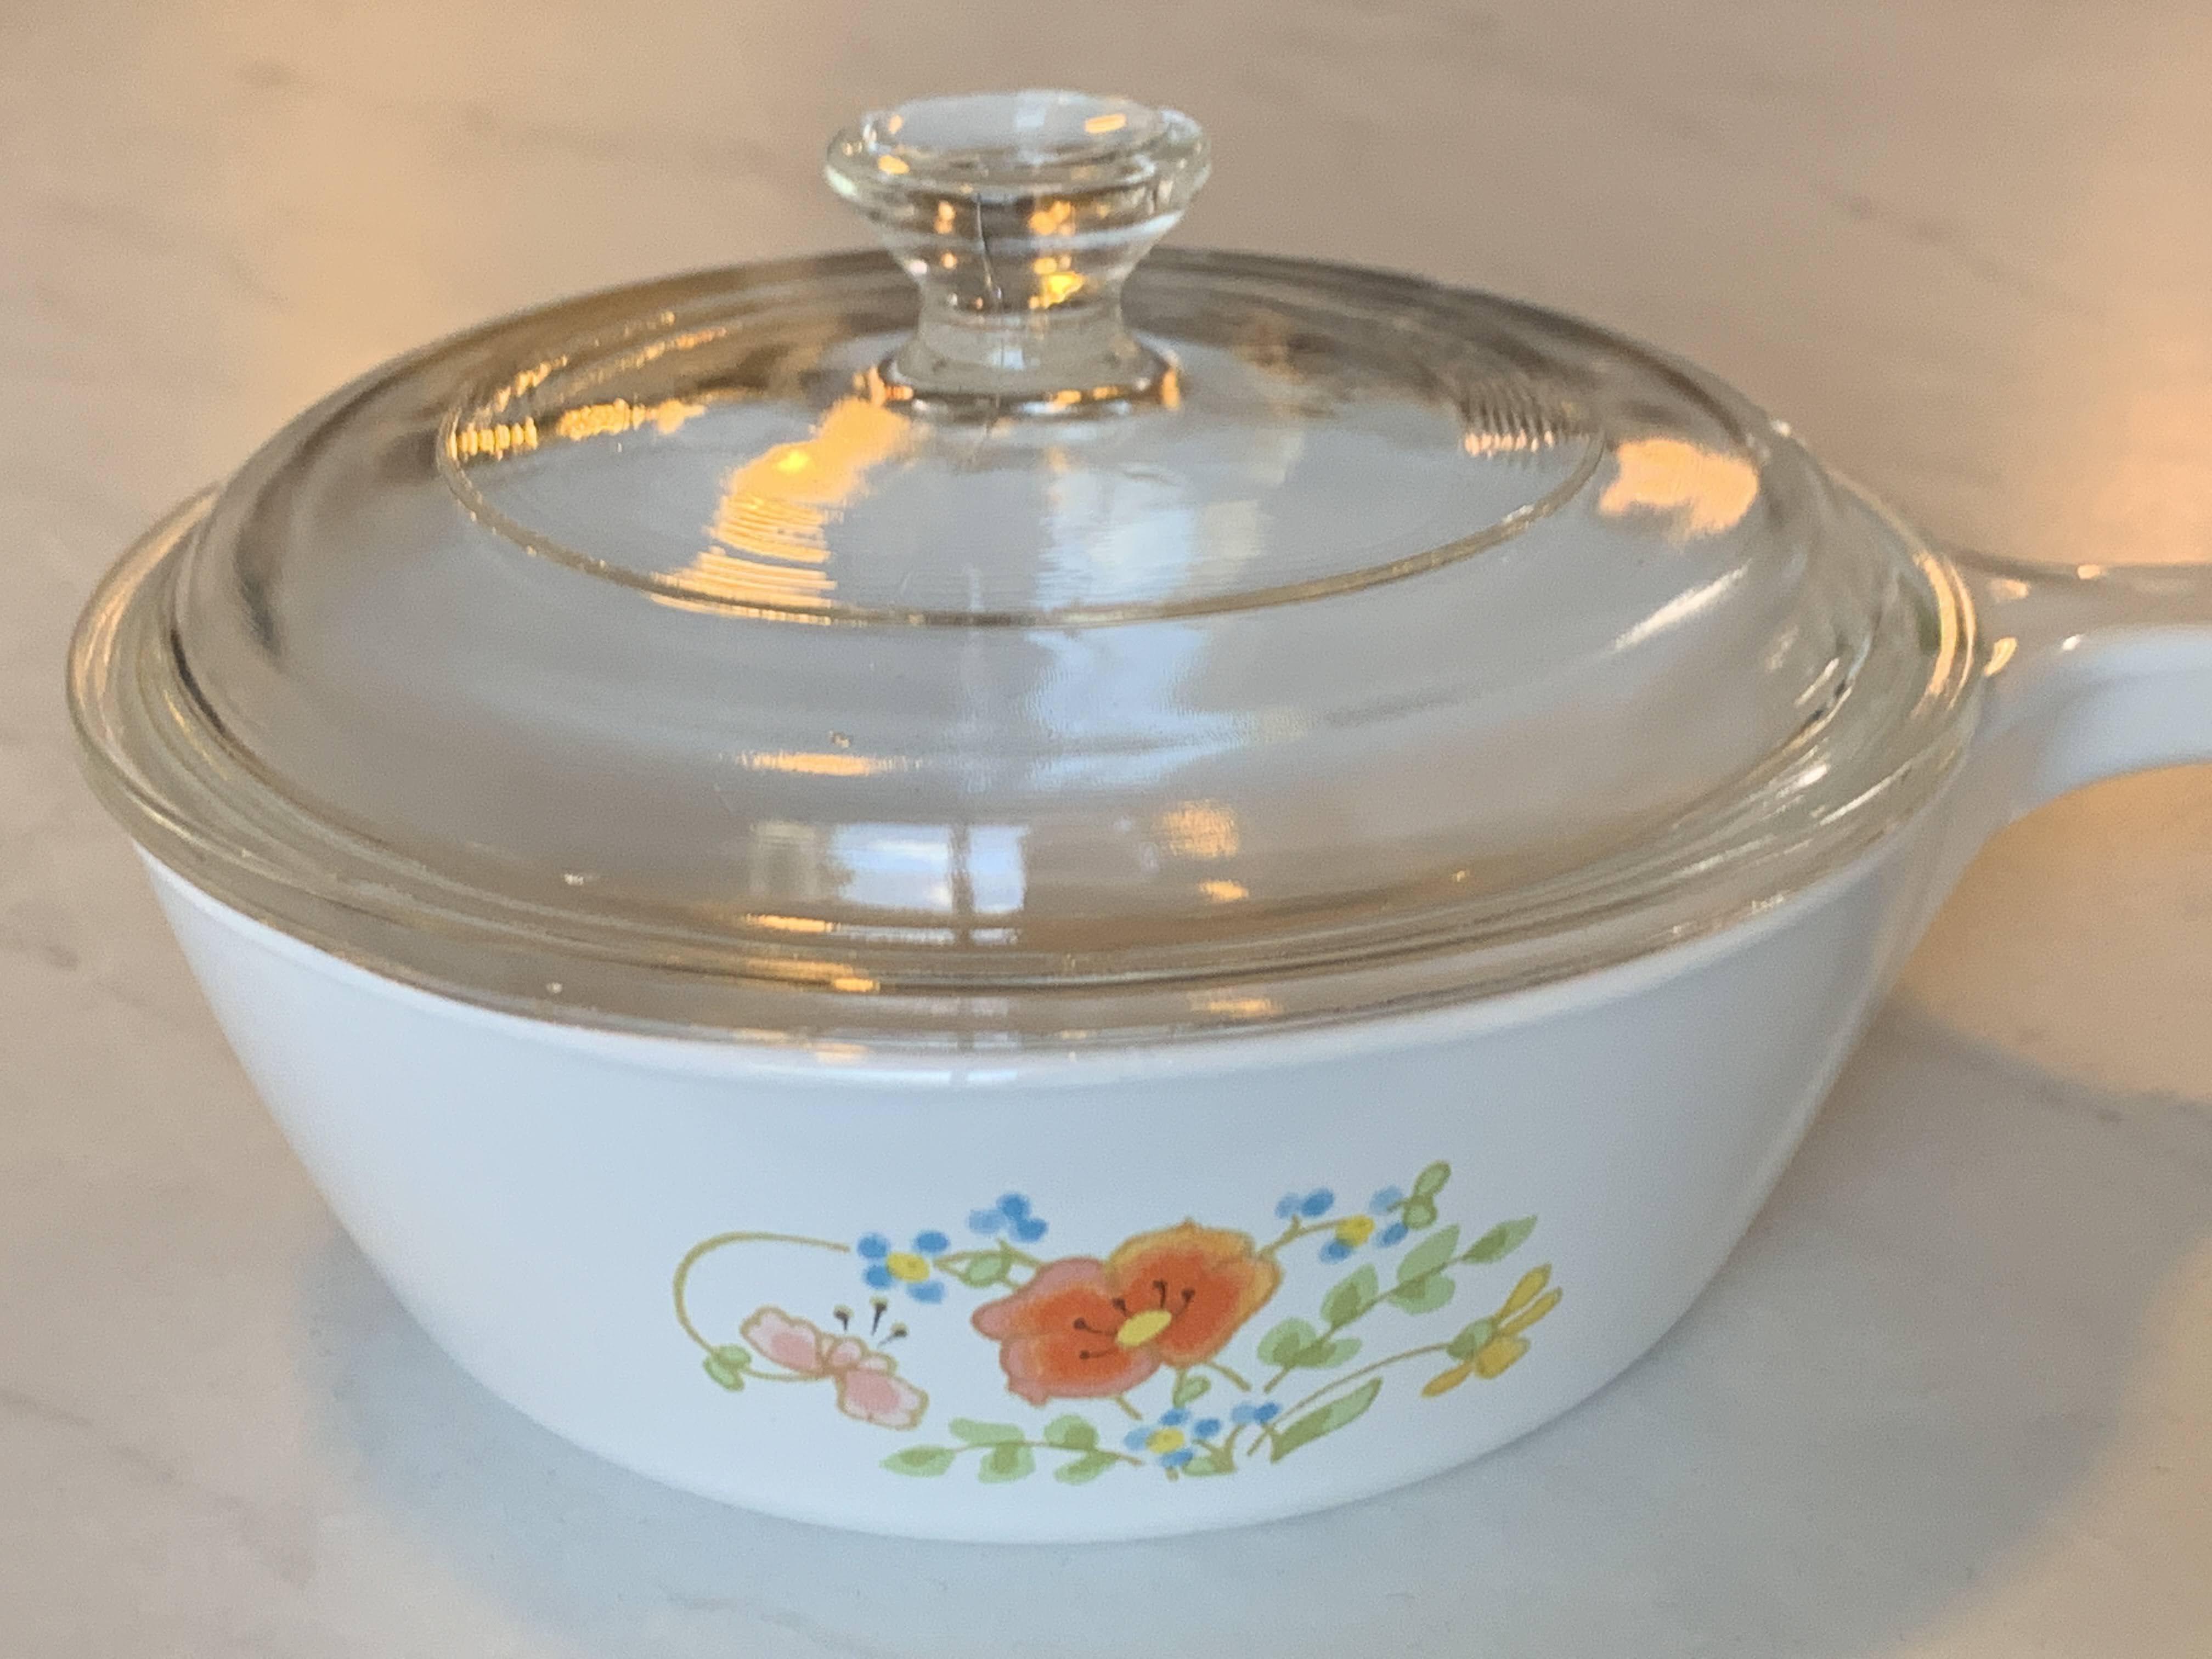 Wild Flower Bouquet 2 - Corning Ware Casserole - Round Shape With Handle and lid